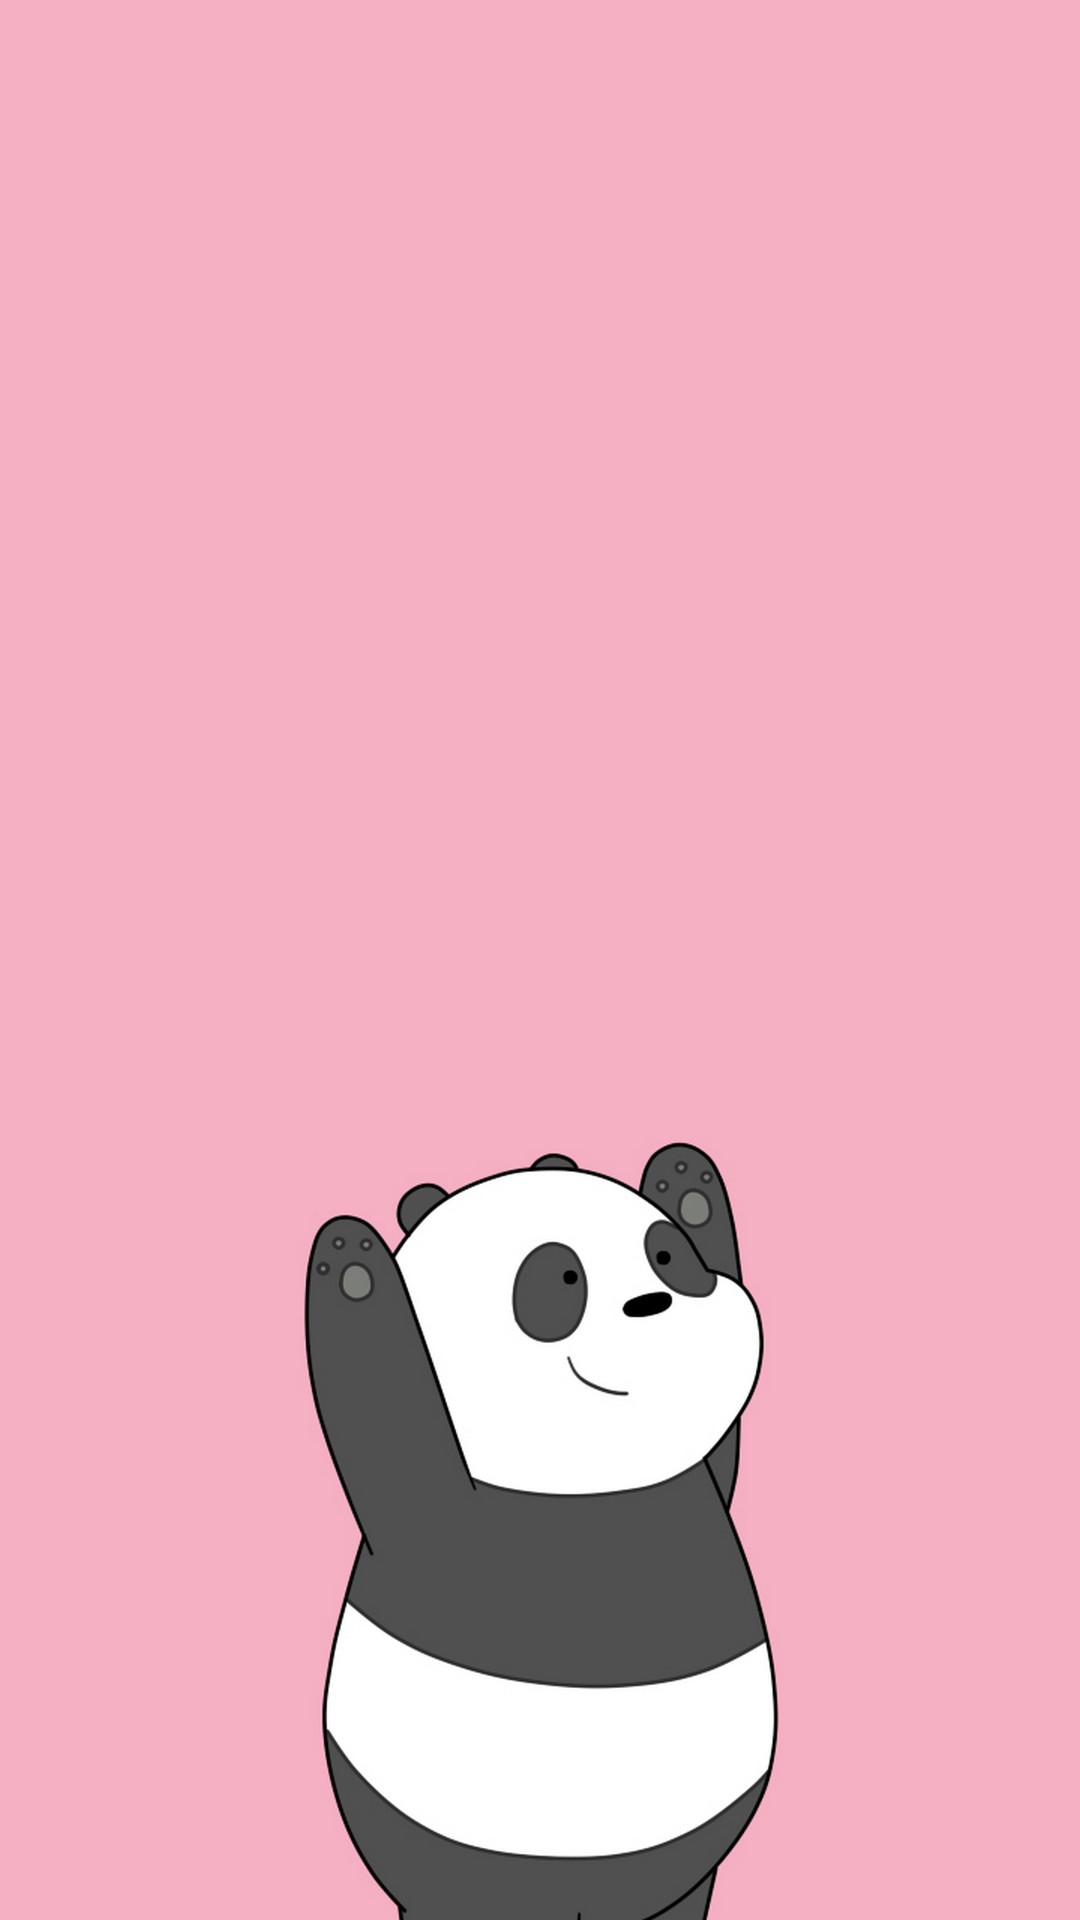 Cute Panda Wallpaper For Android 1080x1920